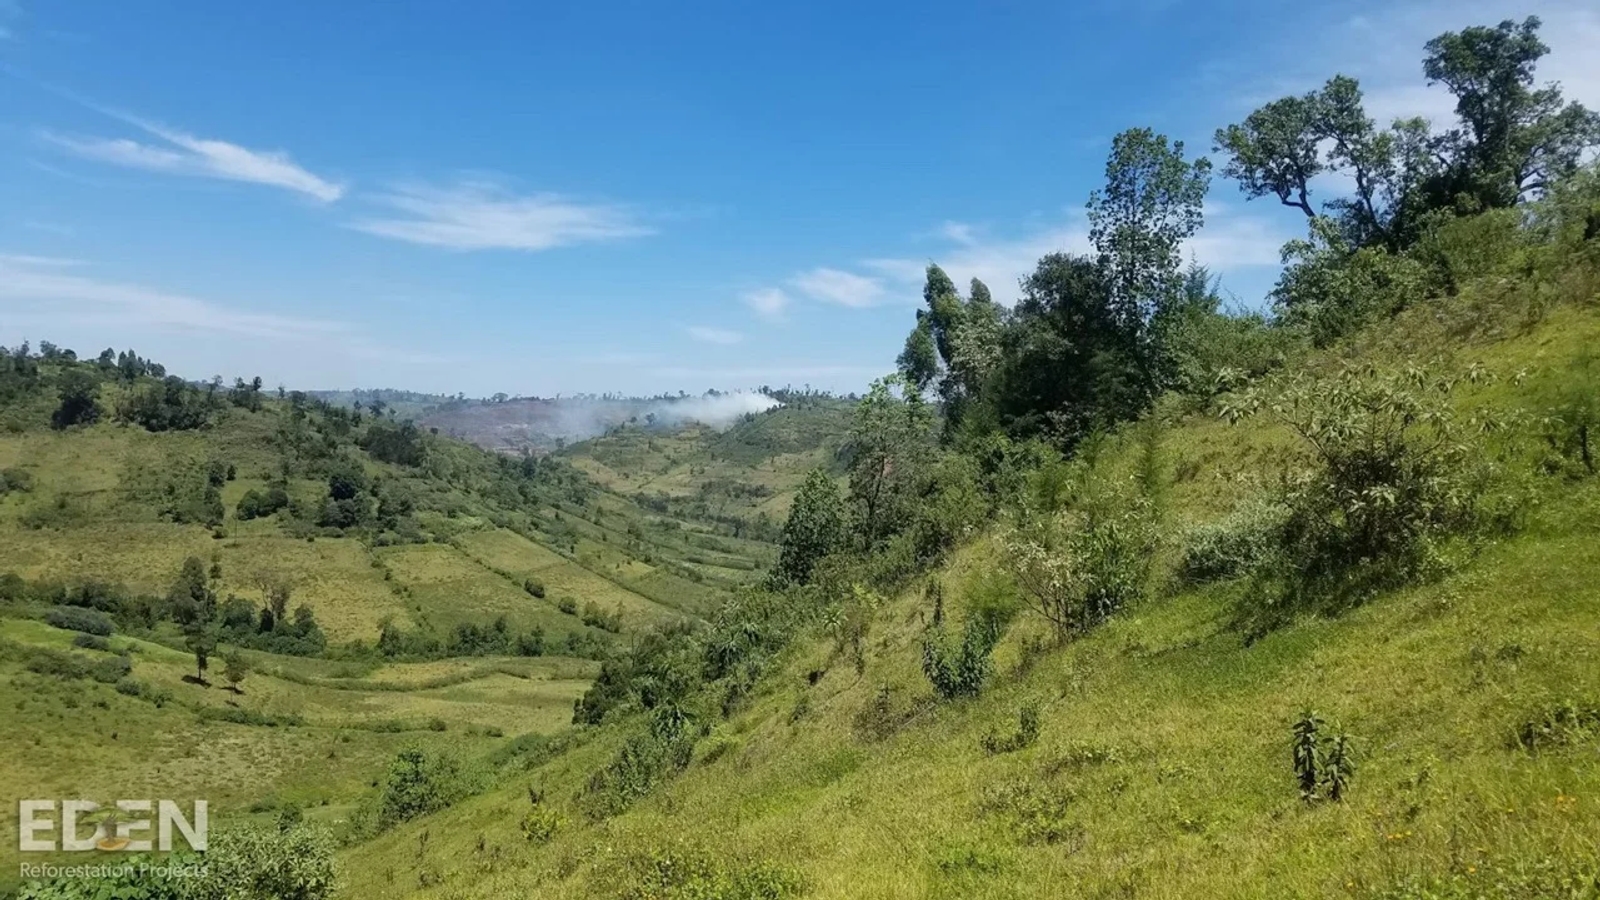 A photo of a green landscape in Kenya, with rolling hills of young trees